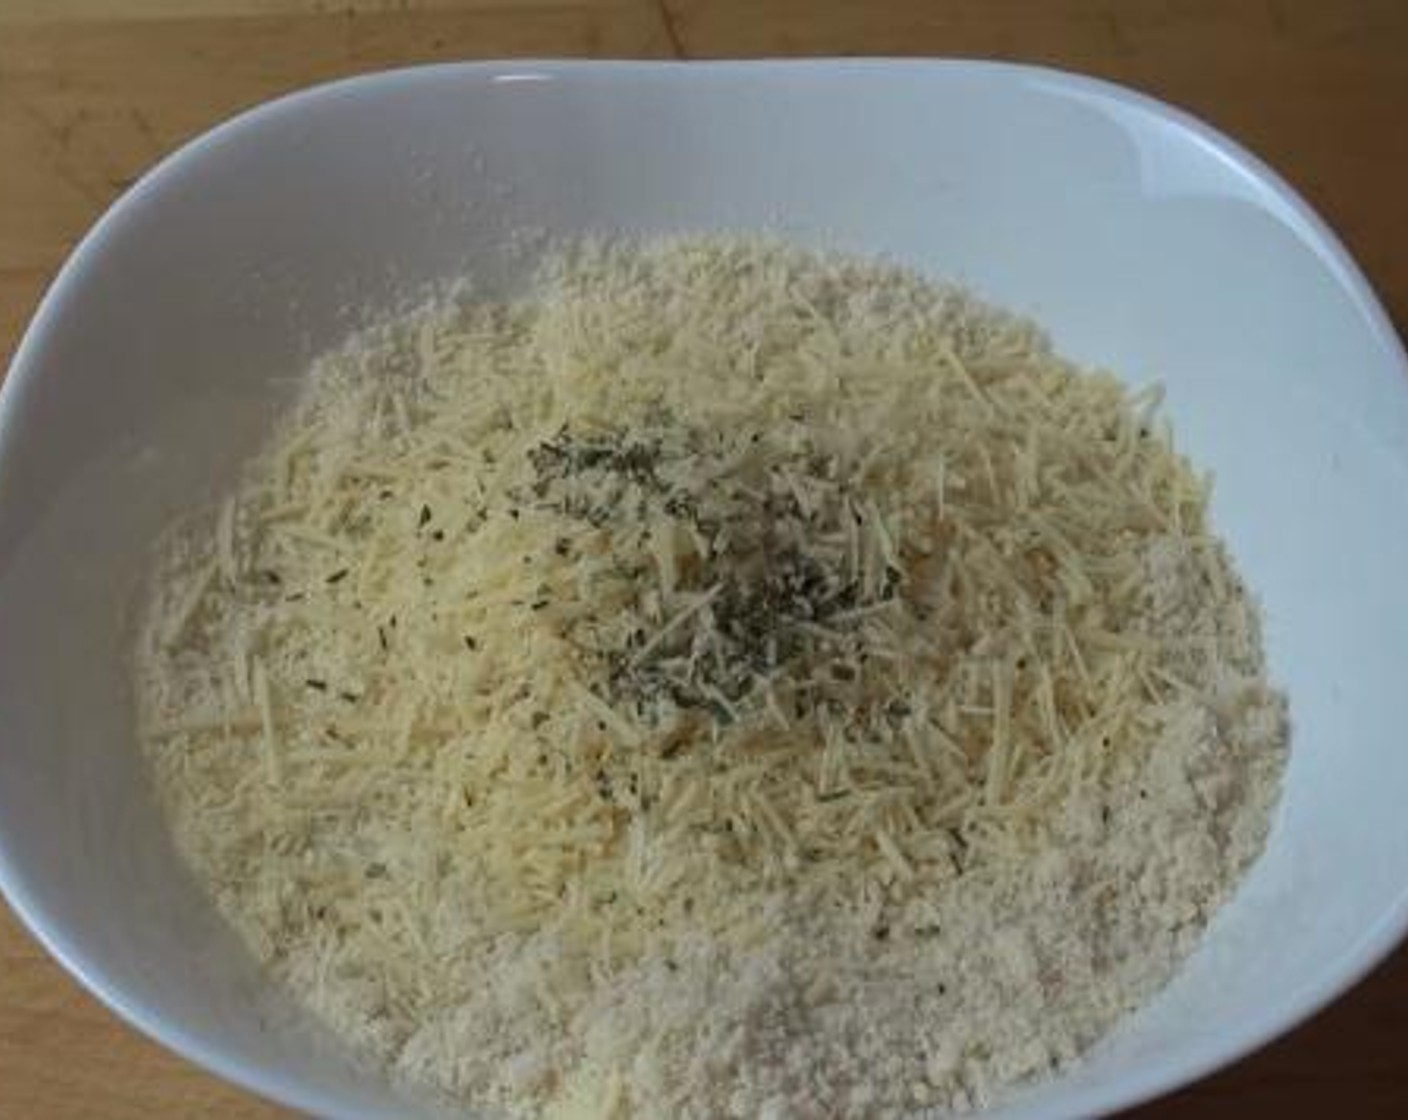 step 1 Into a bowl, add and mix the Breadcrumbs (3 cups), Grated Parmesan Cheese (1 cup), and Fresh Rosemary (1 Tbsp).